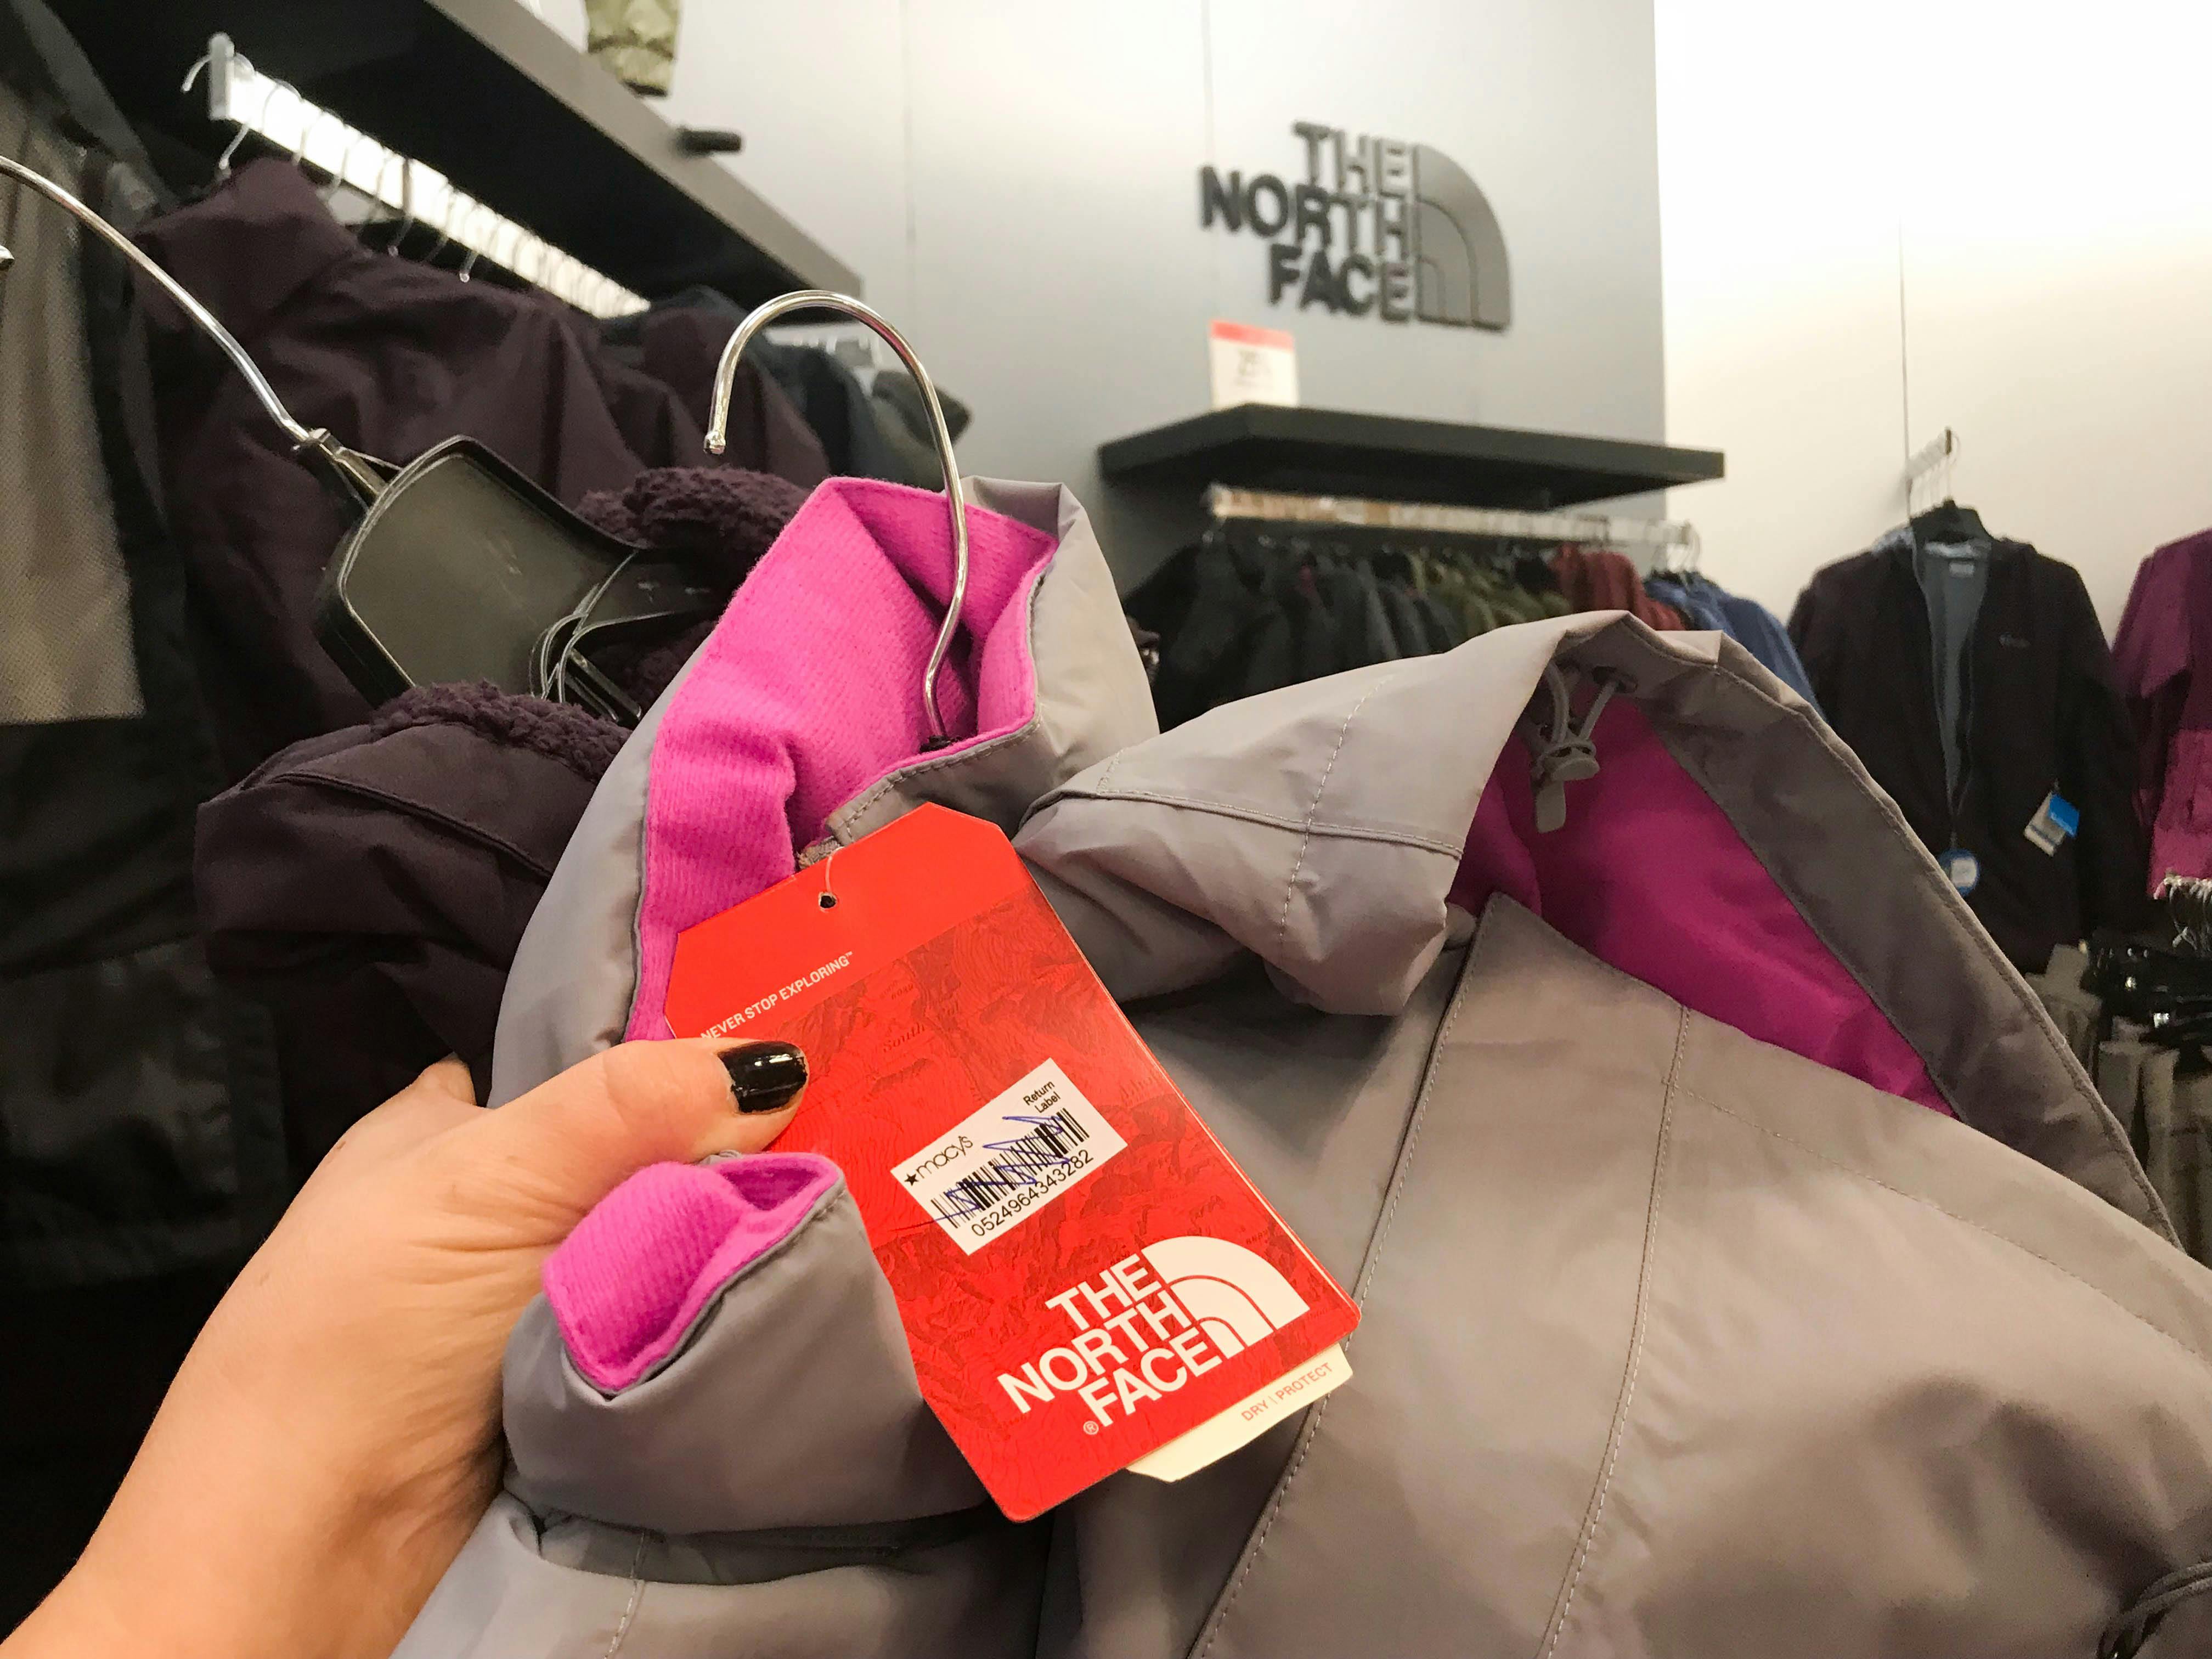 A person's hand taking a The North Face coat and showing the tag at Macy's.